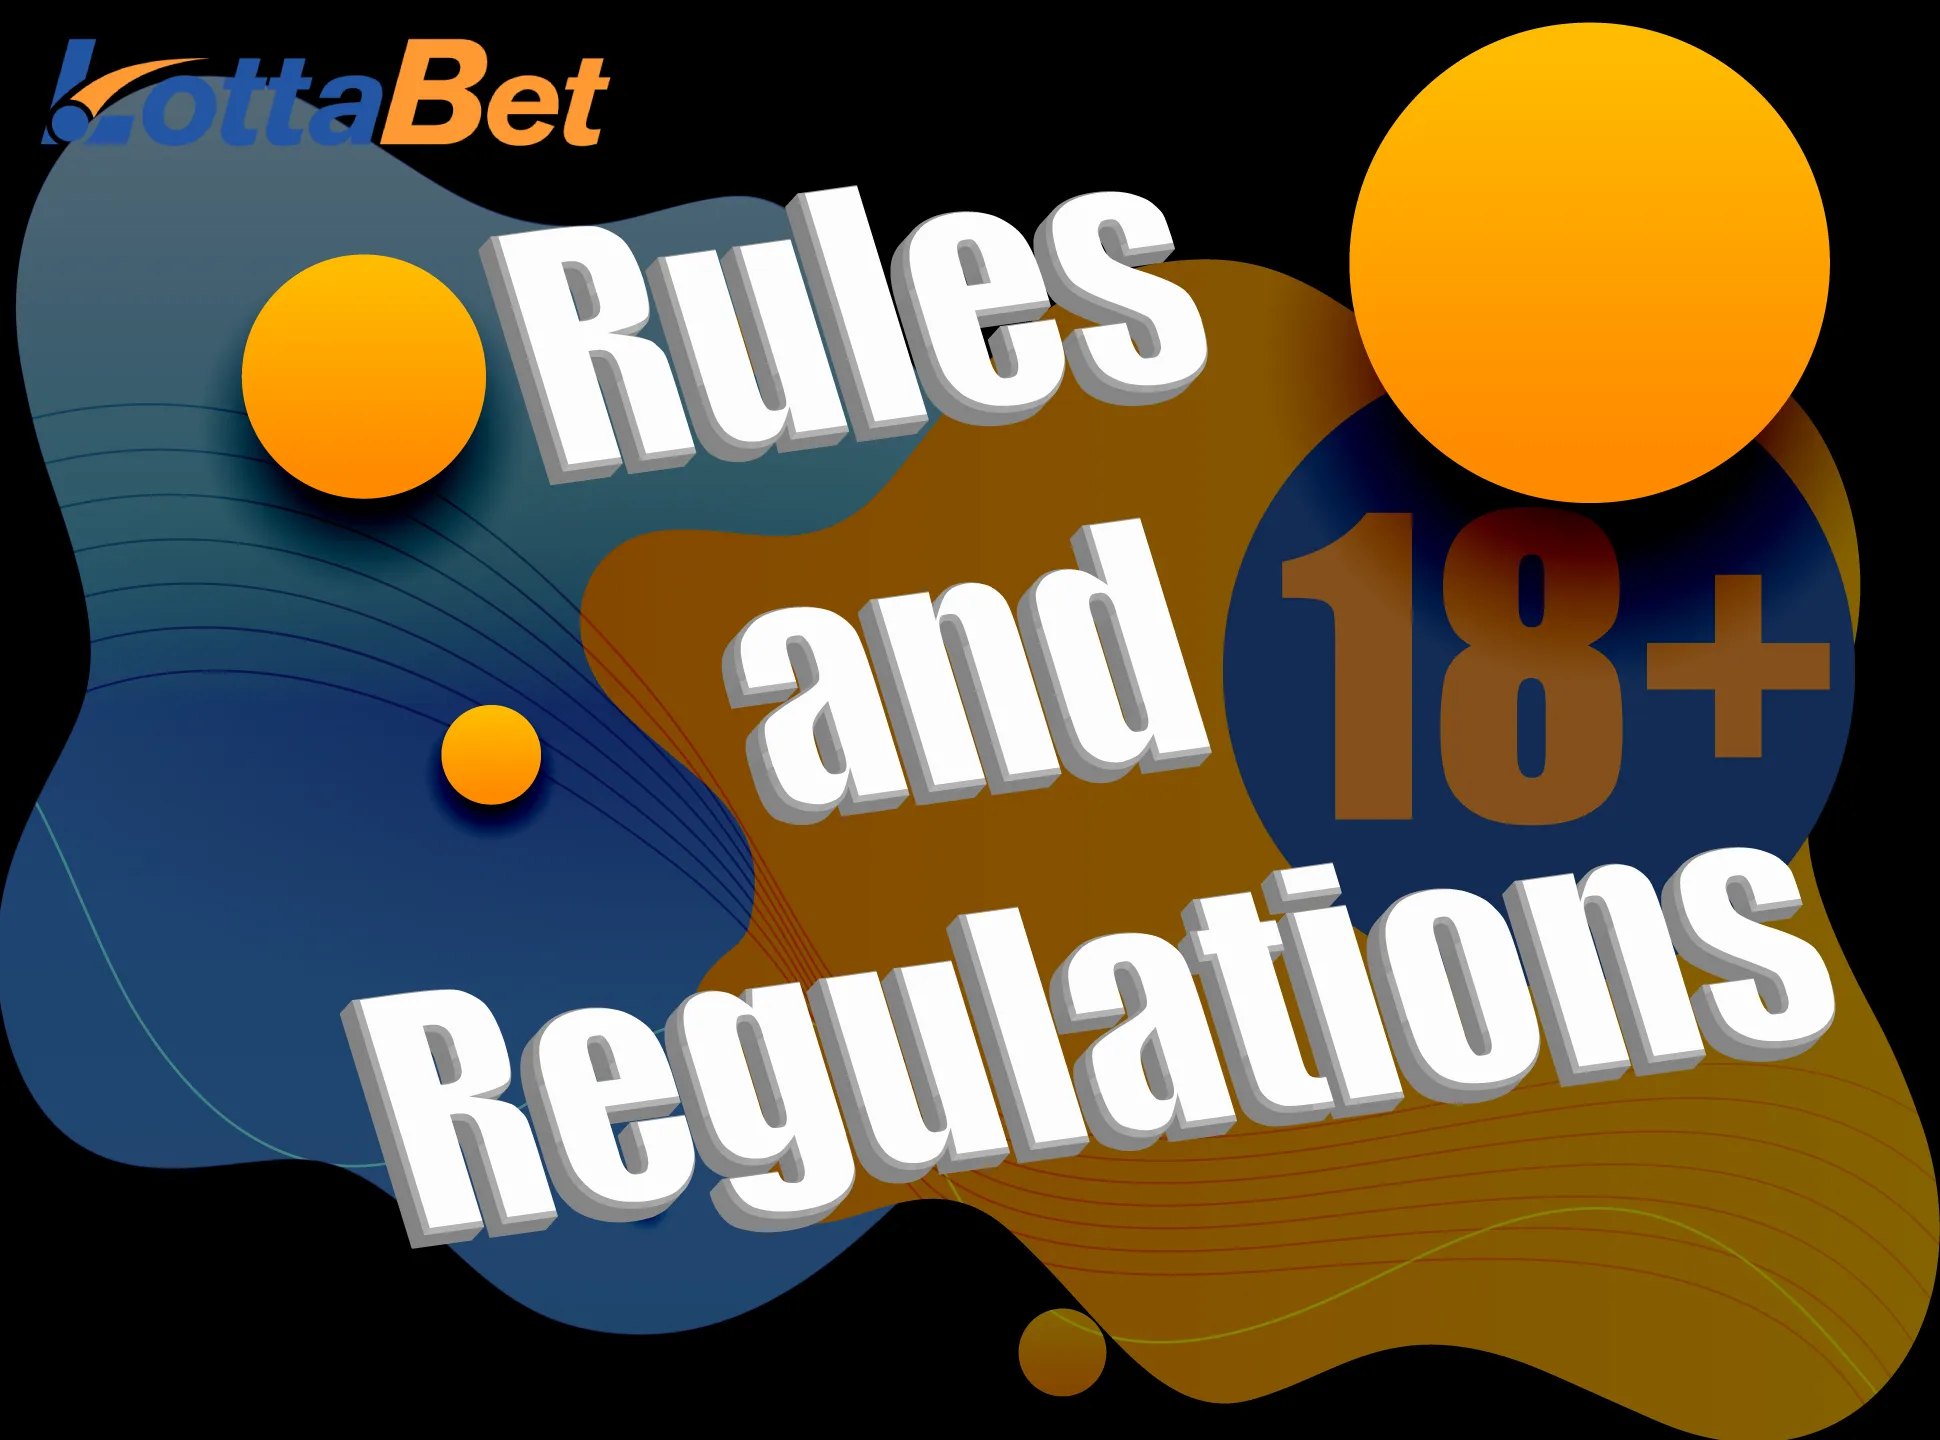 Read the rules of using the Lottabet betting shop.